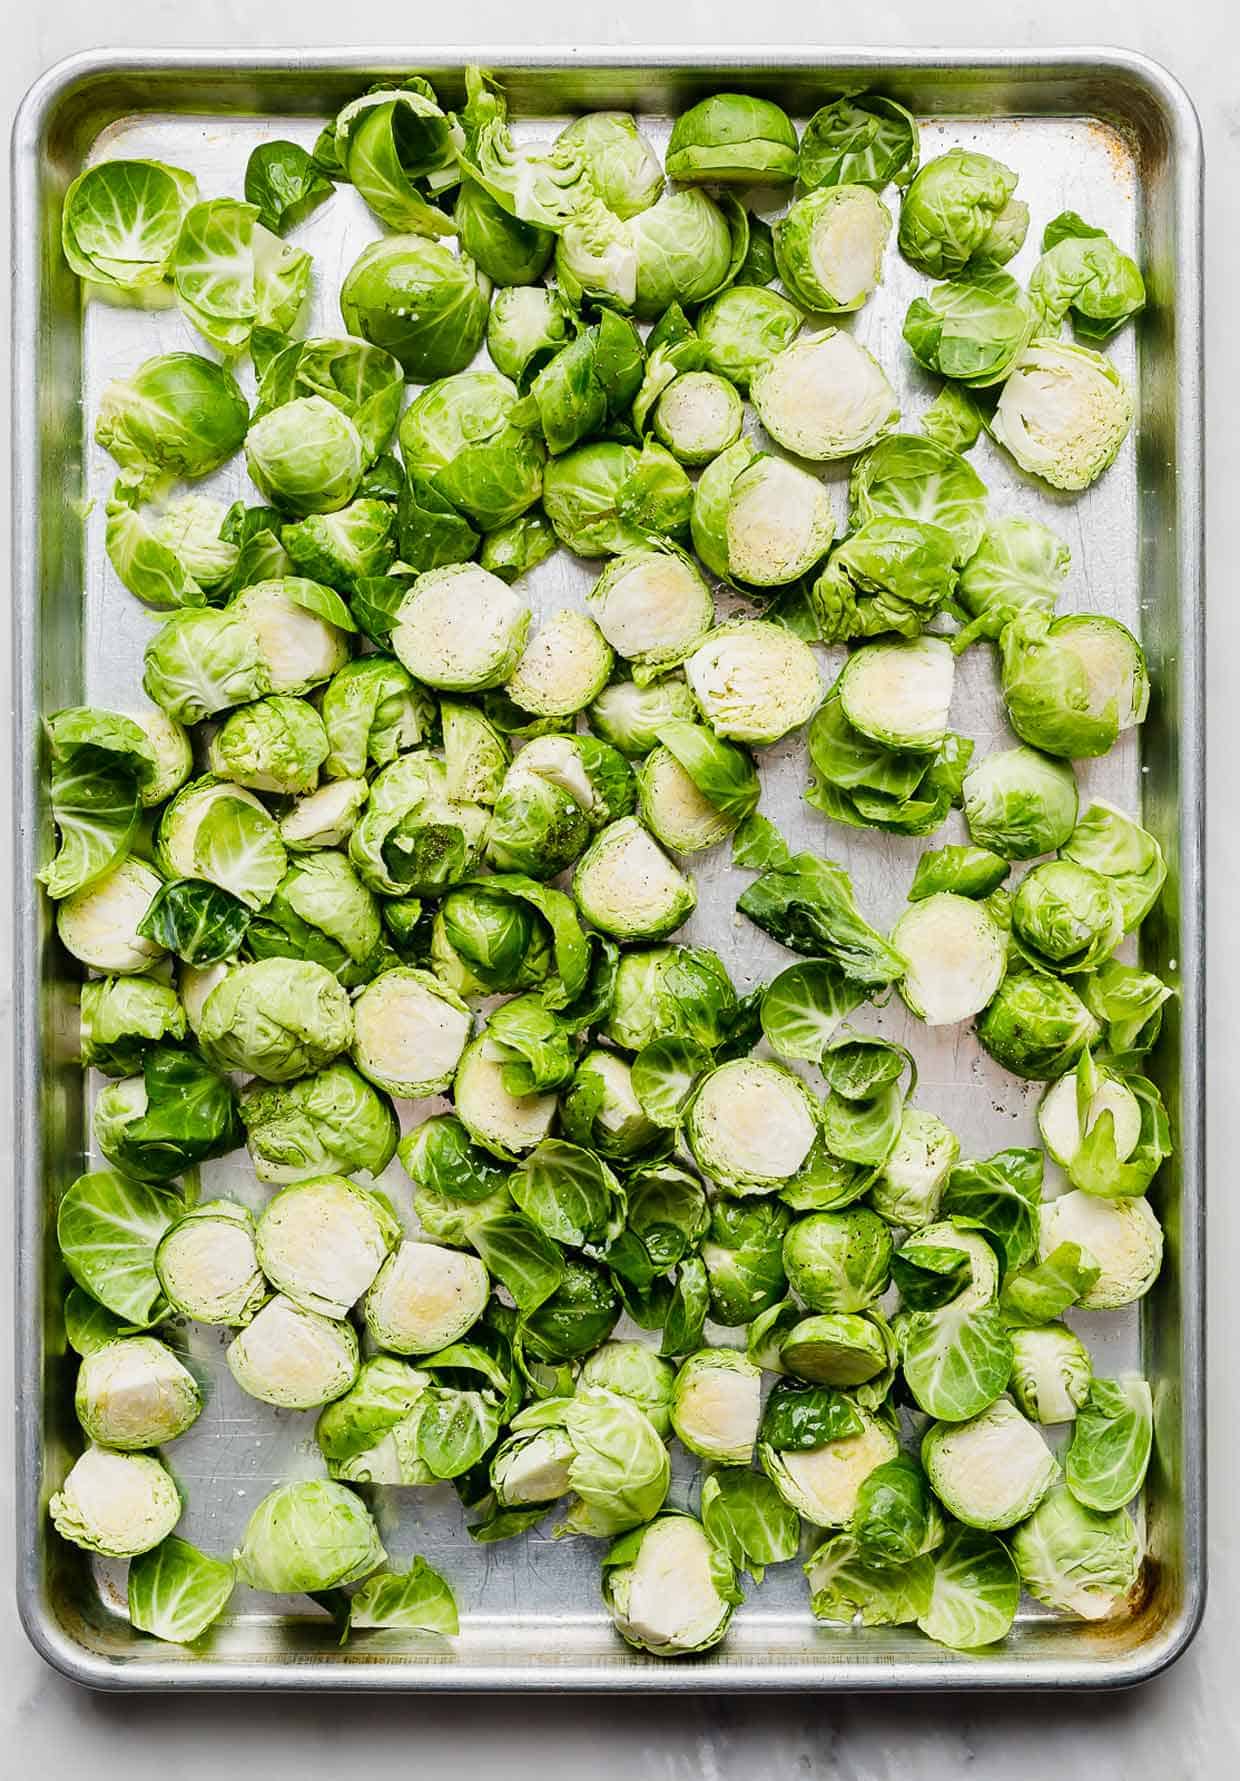 A sheet pan with chopped Brussels sprouts on it.